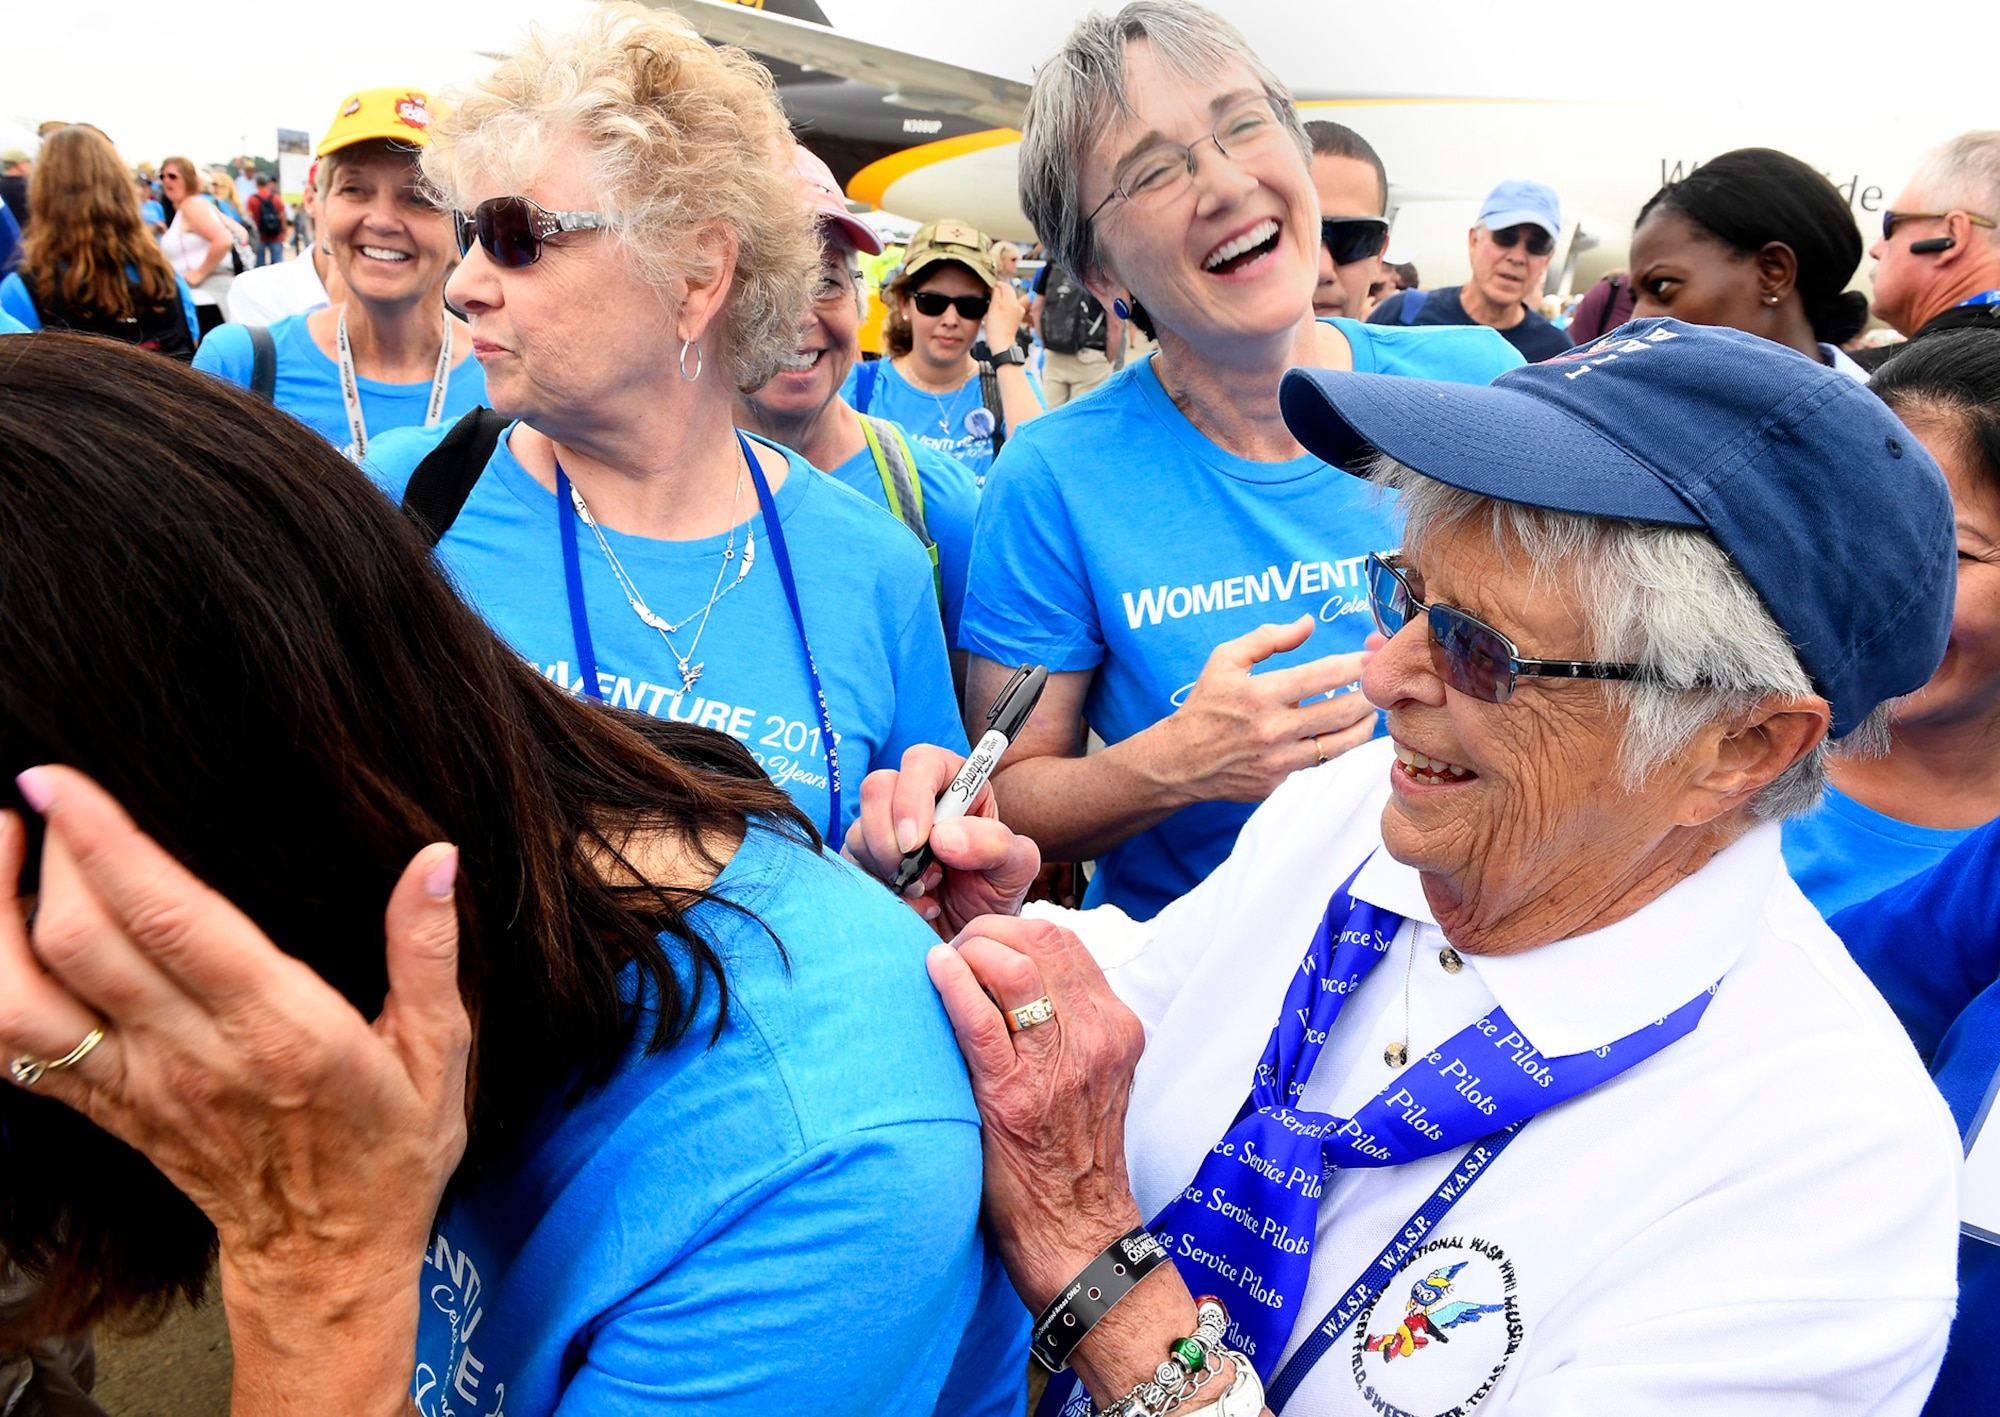 Secretary of the Air Force Heather Wilson laughs with Women's Auxiliary Service Pilot Jane Doyle while she autographs a T-shirt following a group portrait of women aviators in Oshkosh, Wisc., July 26, 2017. (U.S. Air Force photo/Scott M. Ash)